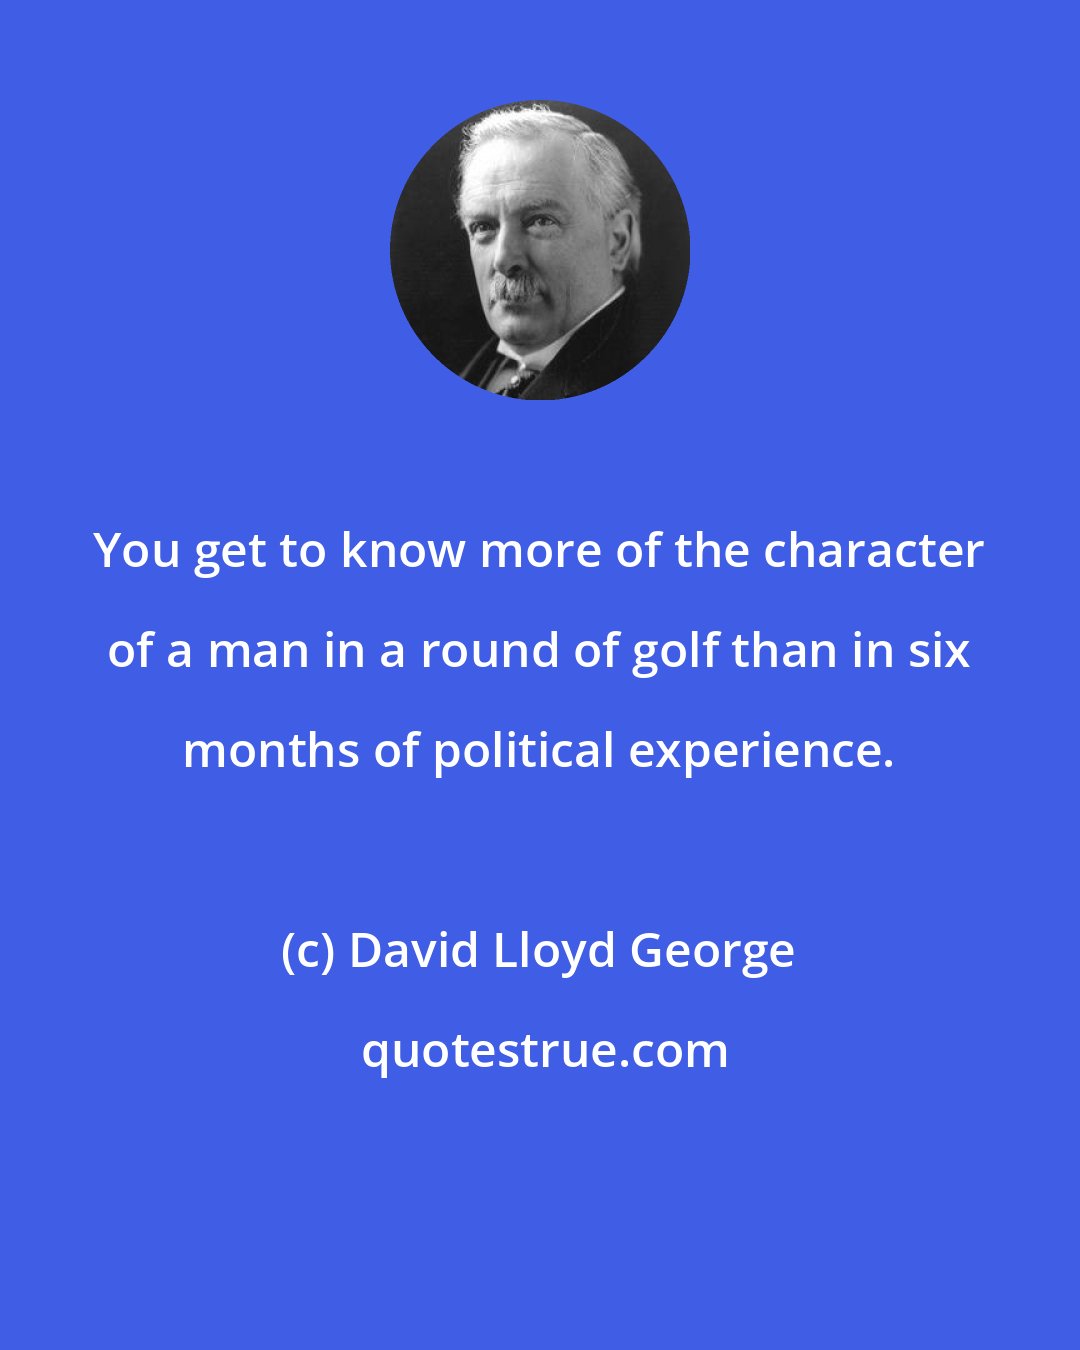 David Lloyd George: You get to know more of the character of a man in a round of golf than in six months of political experience.